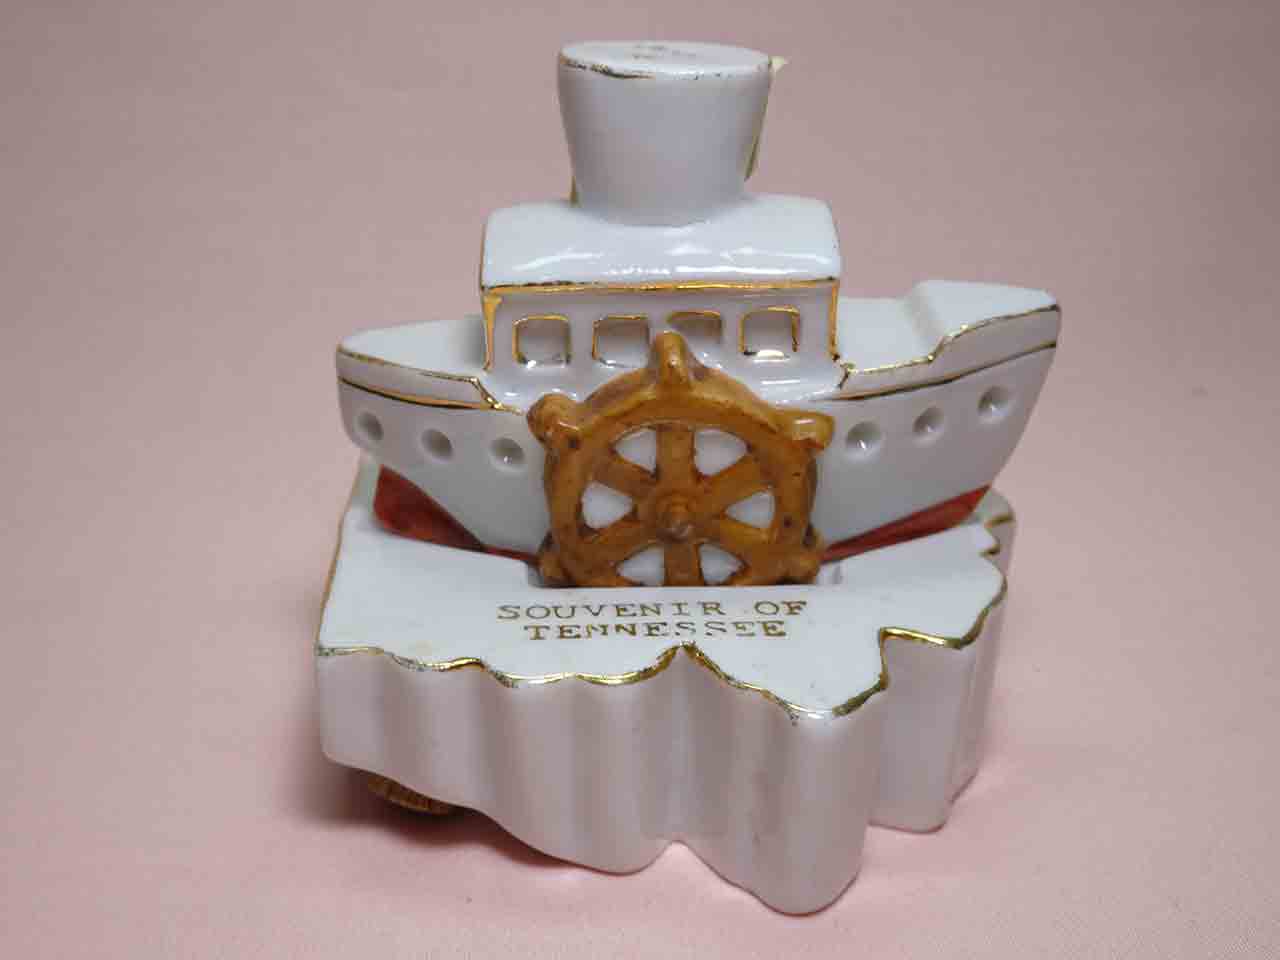 Ohio and river boat salt and pepper shakers